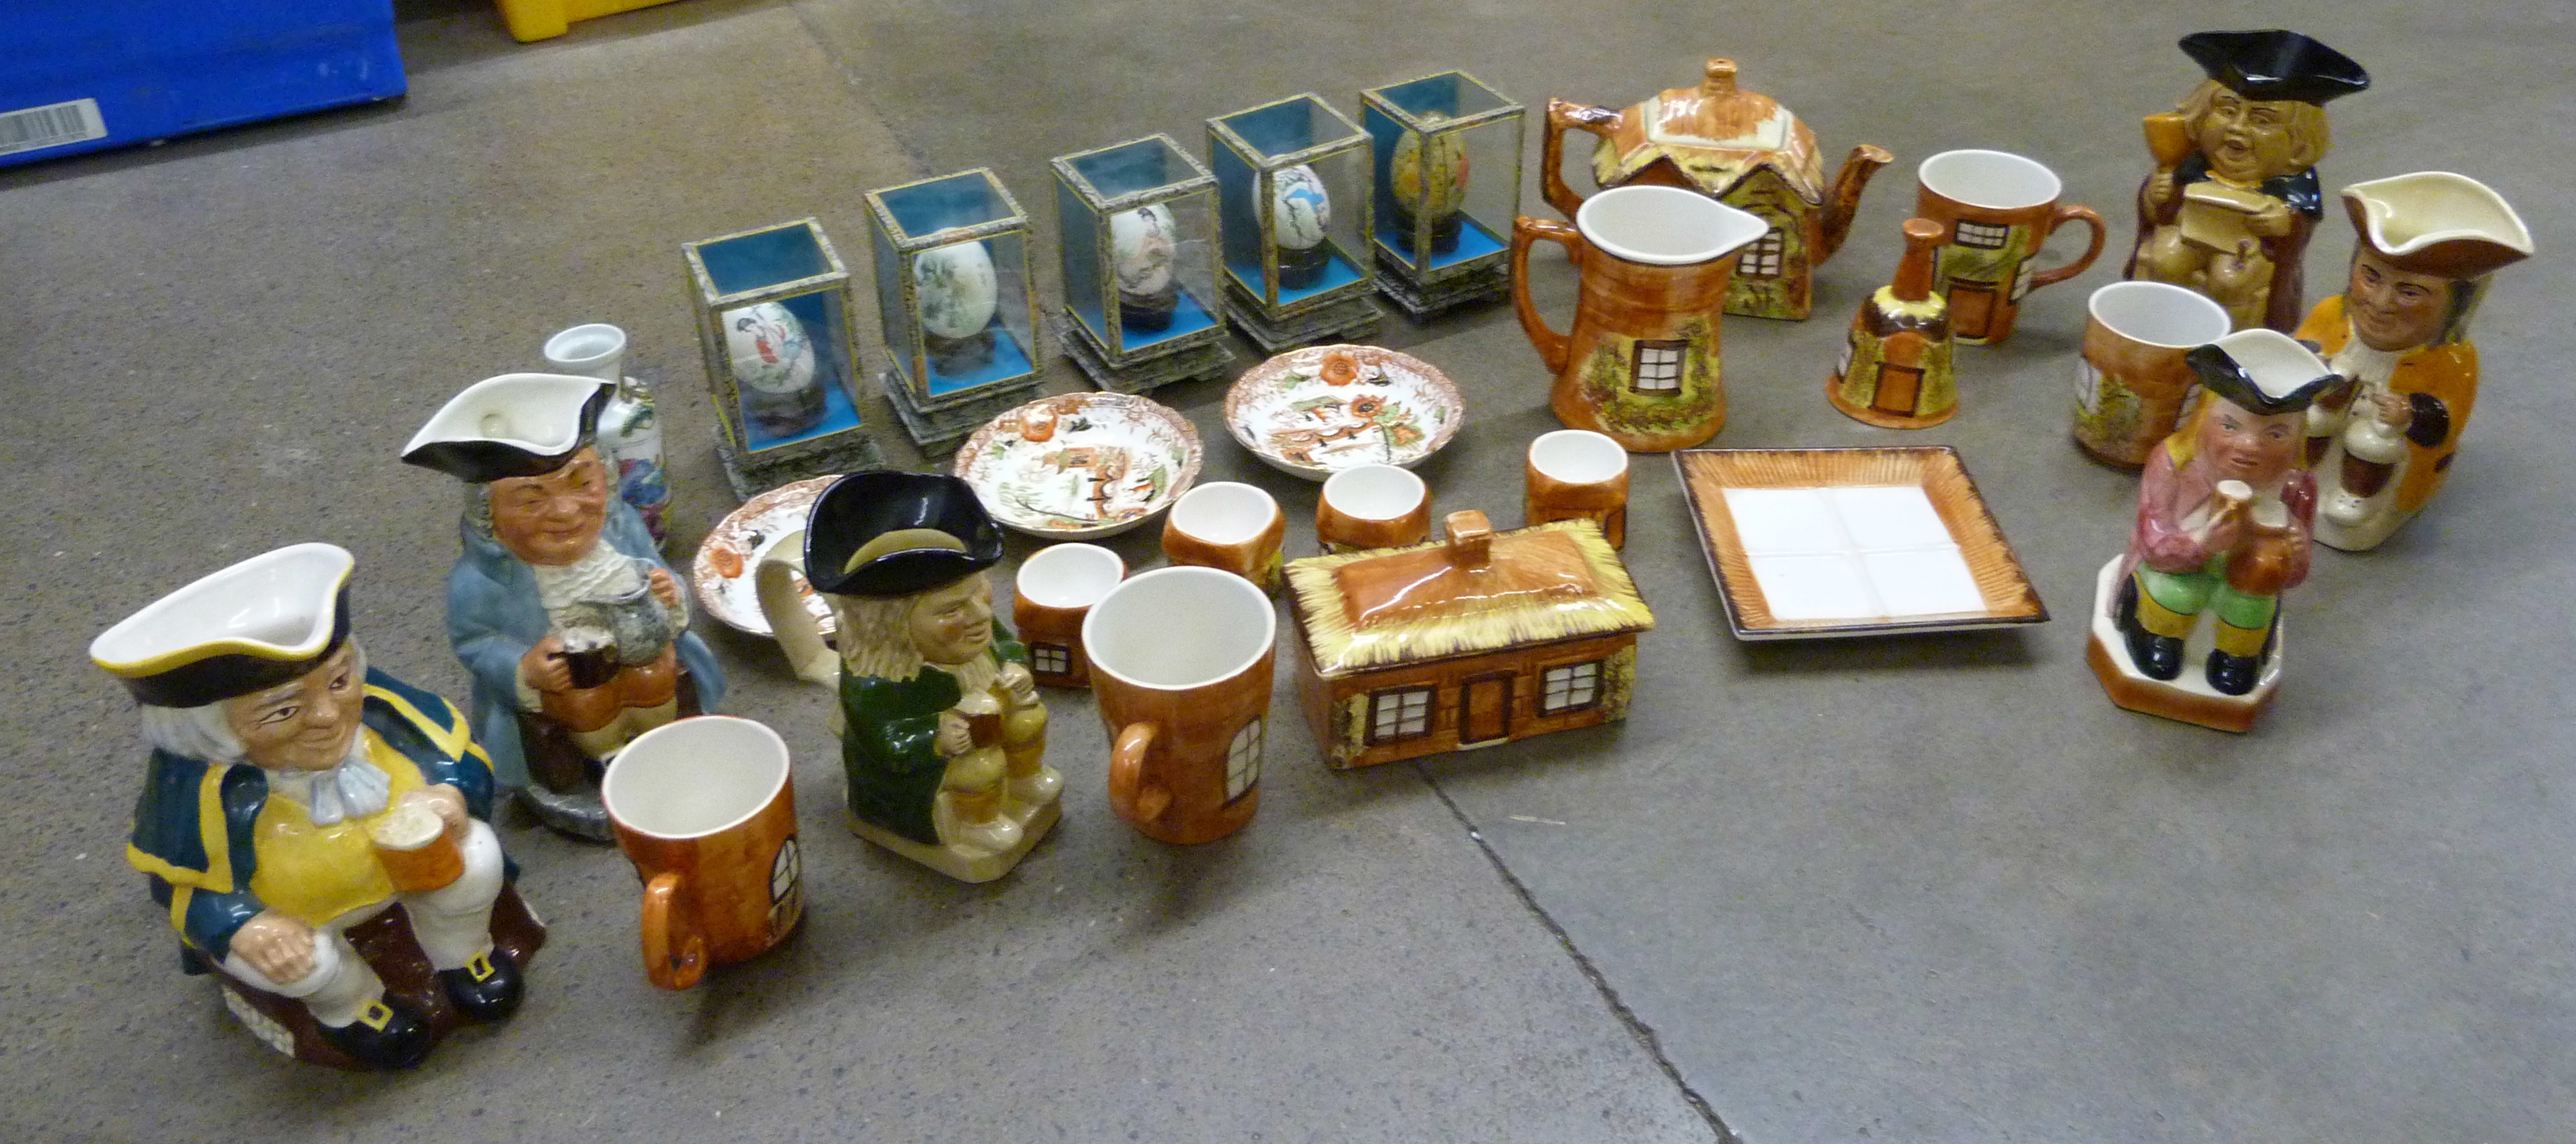 Six Toby jugs, cottageware, Chinese decorative egg shells and oriental saucers**PLEASE NOTE THIS LOT